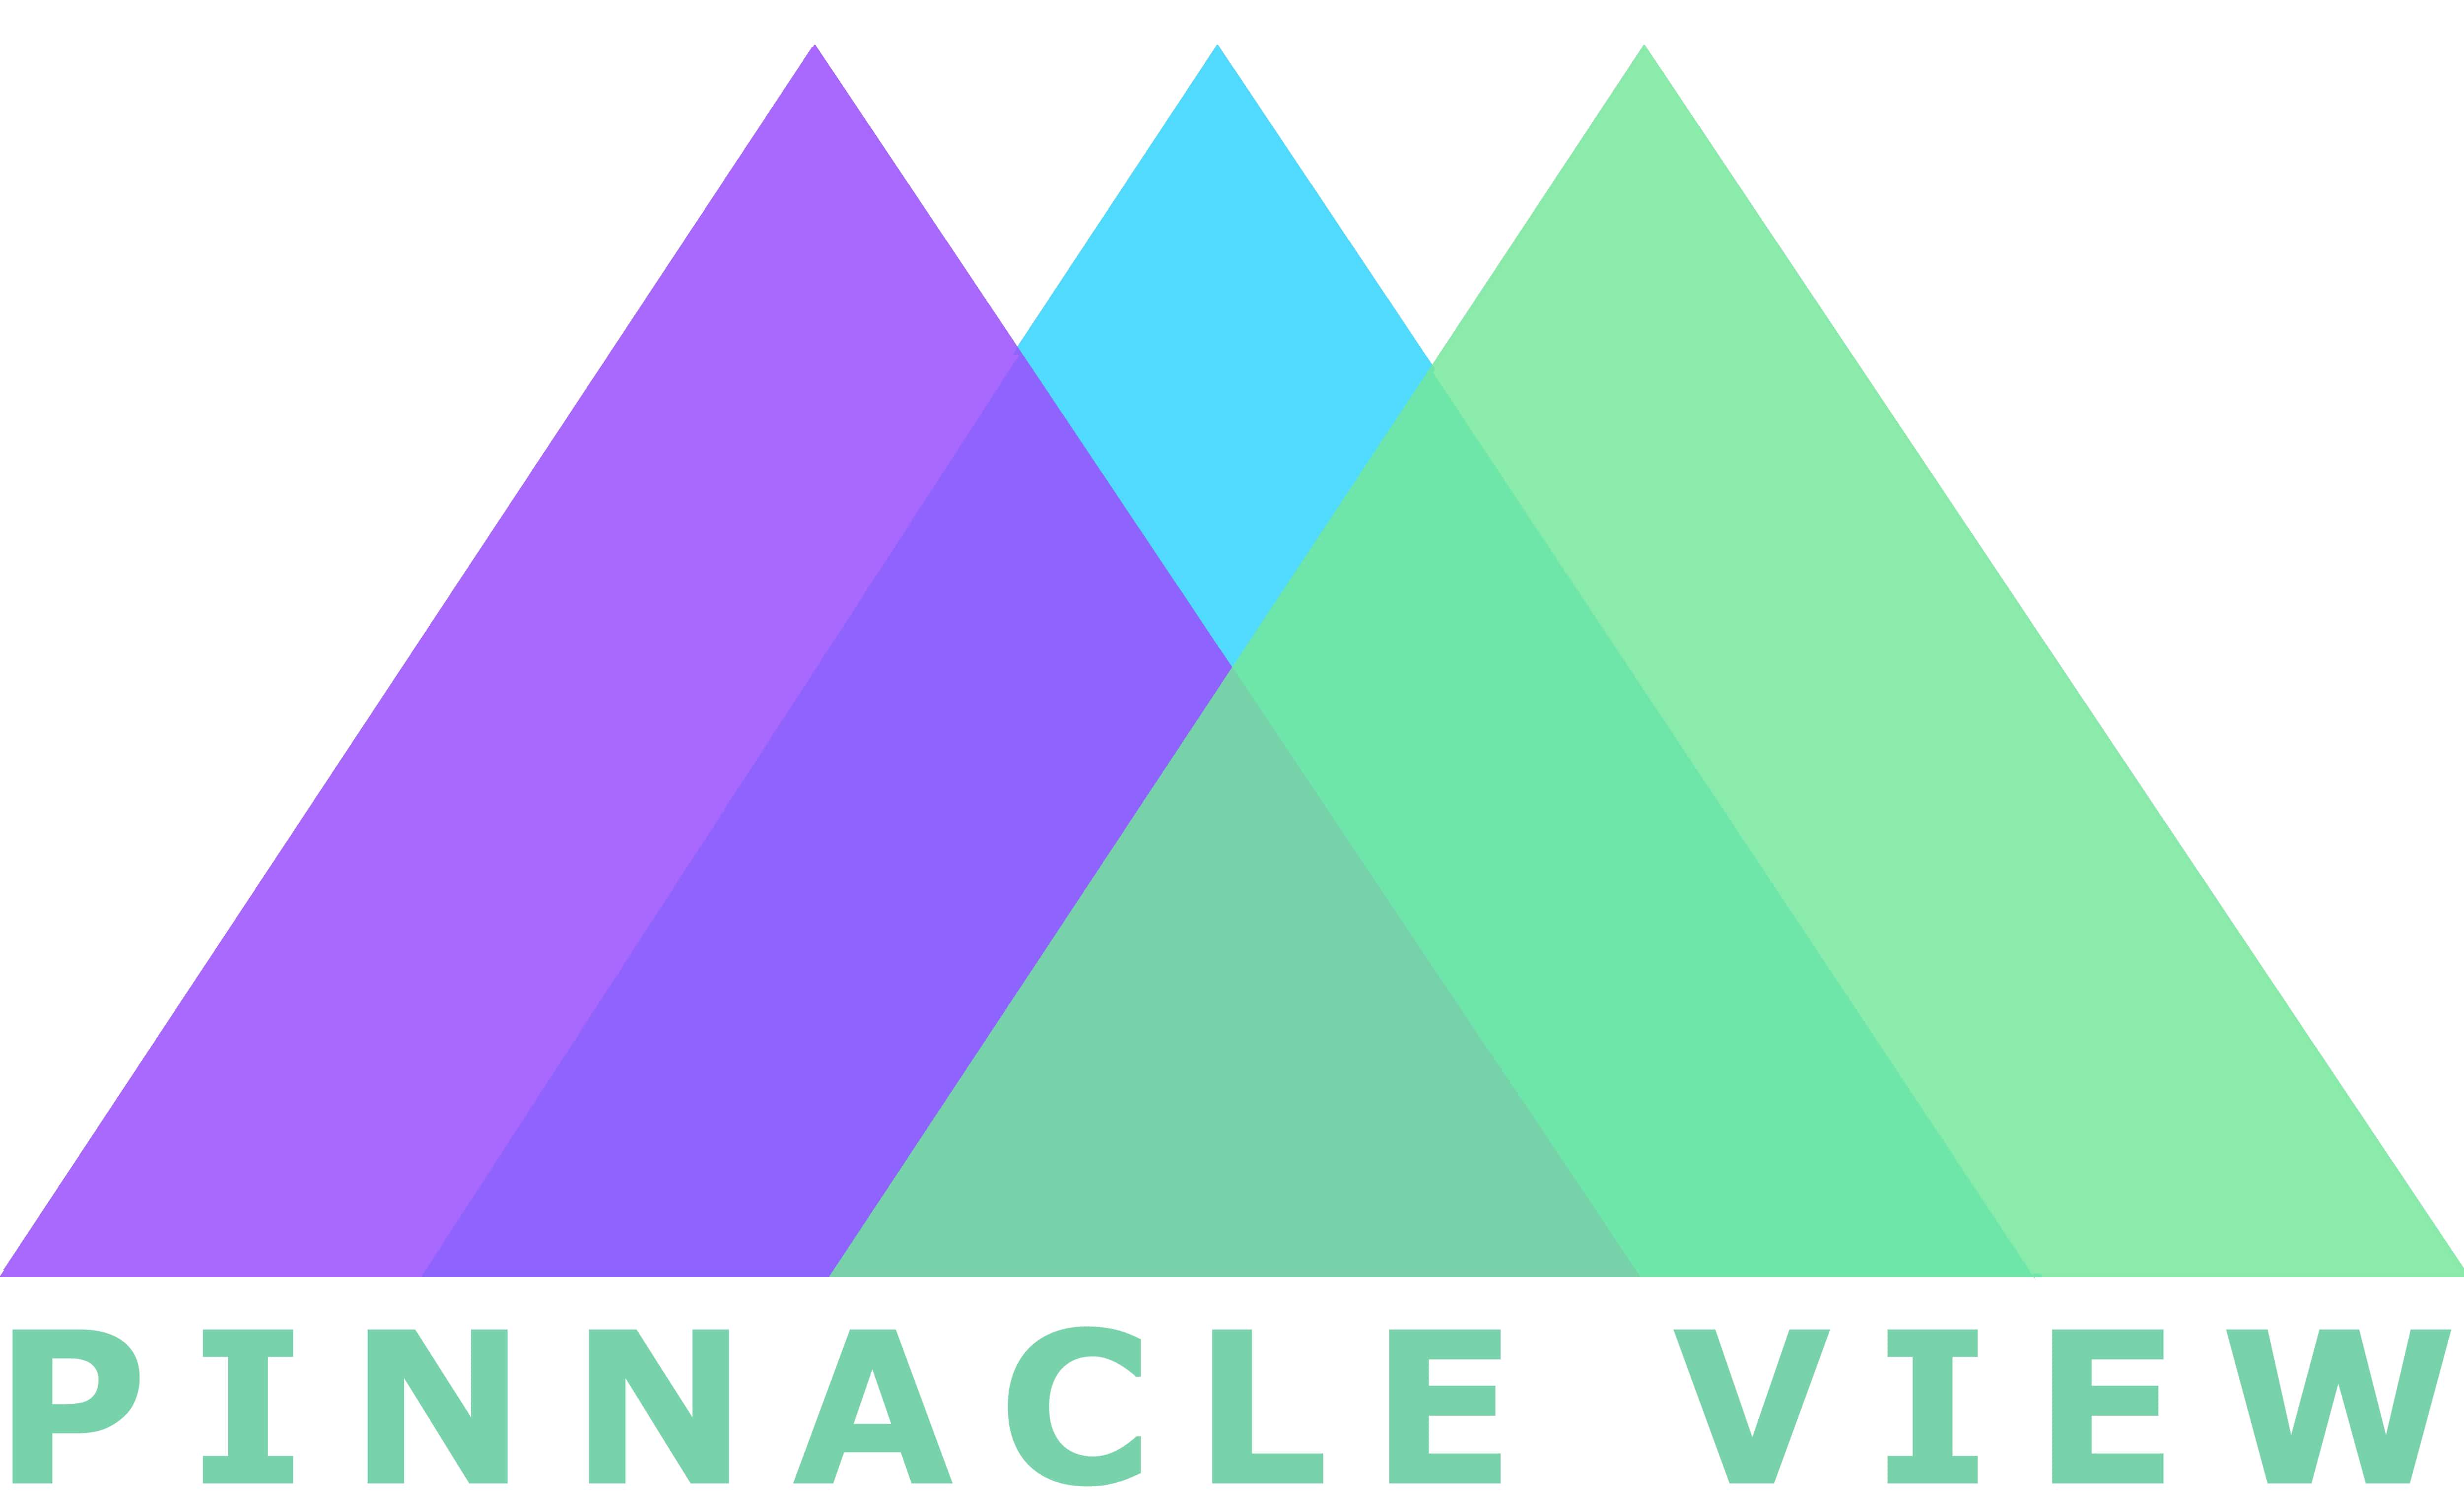 Pinnacle View Inc. profile on Qualified.One